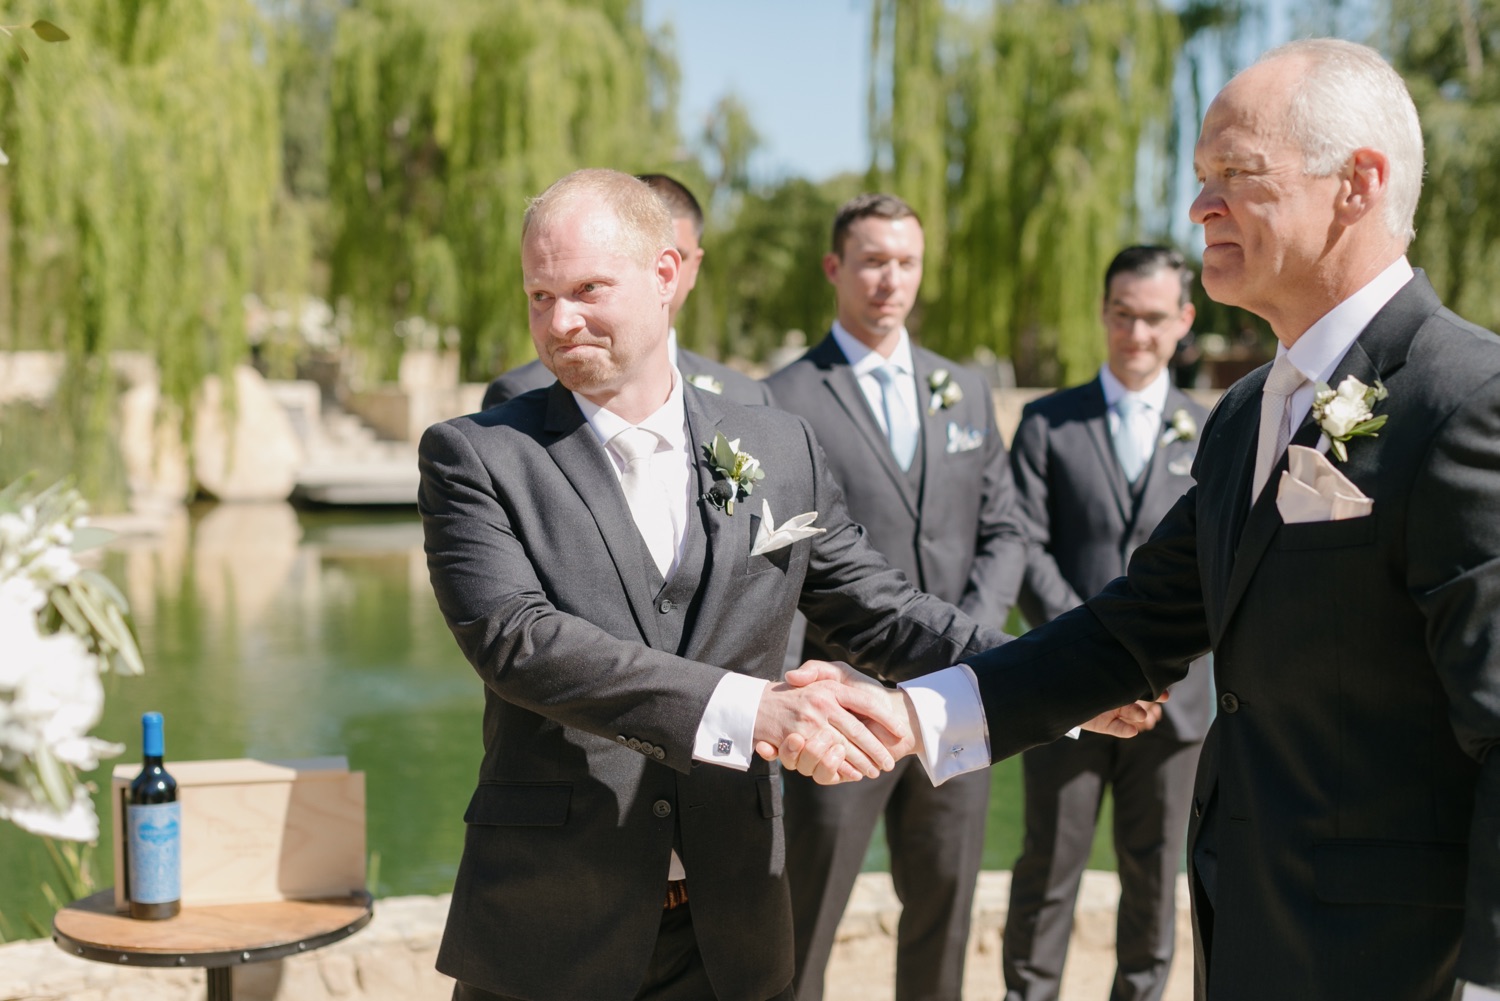 Father of the bride shaking hands with the groom at their wedding at Terra Mia